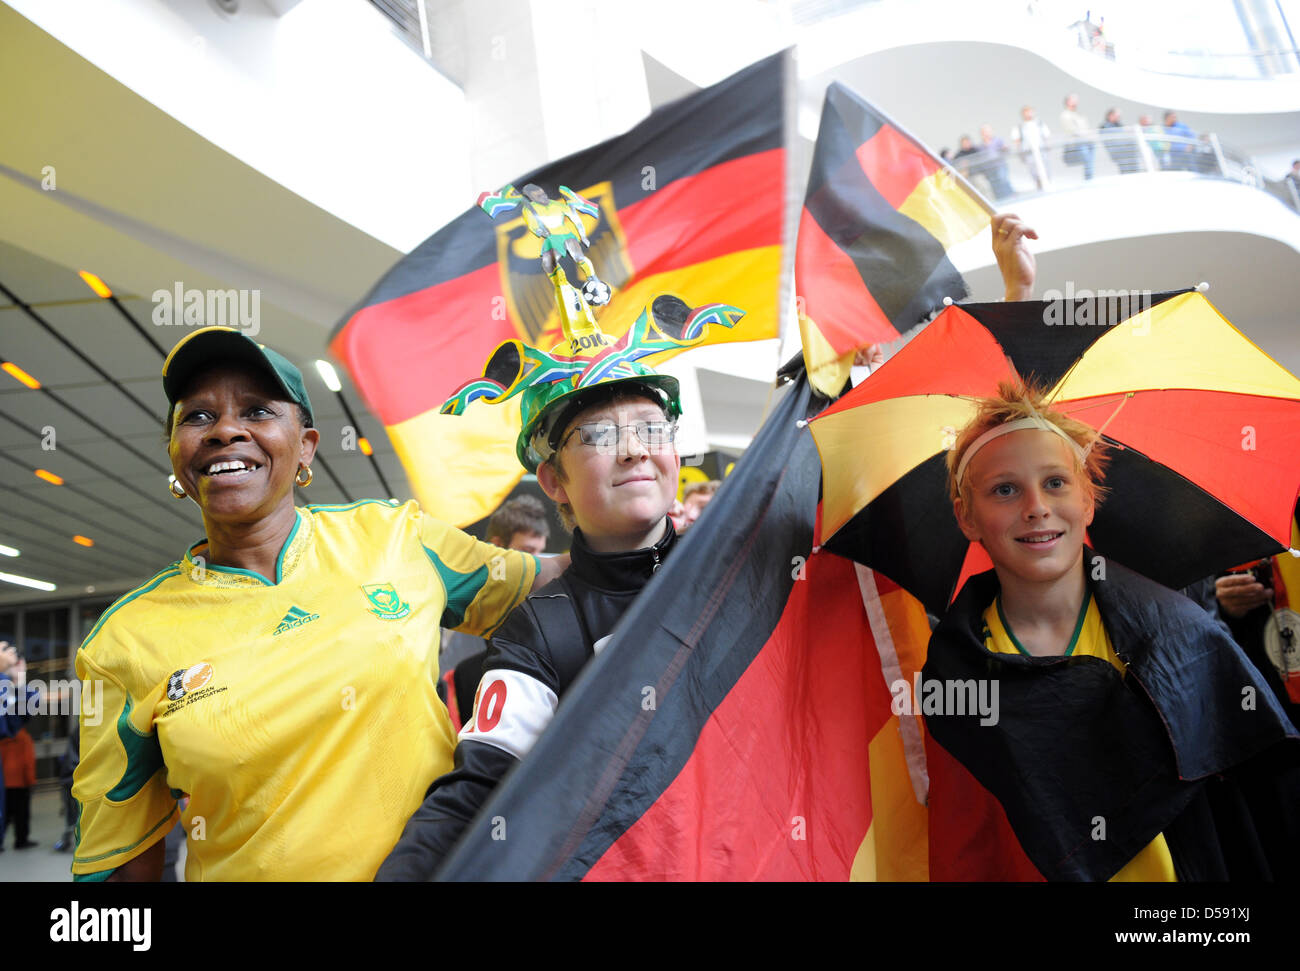 Pupils of German School Pretoria celebrate the arrival of the German team at the airport Johannesburg, South Africa, 07 June 2010. The German national team arrived in the morning in Johannesburg, South Africa, 07 June 2010. Photo: MARCUS BRANDT Stock Photo